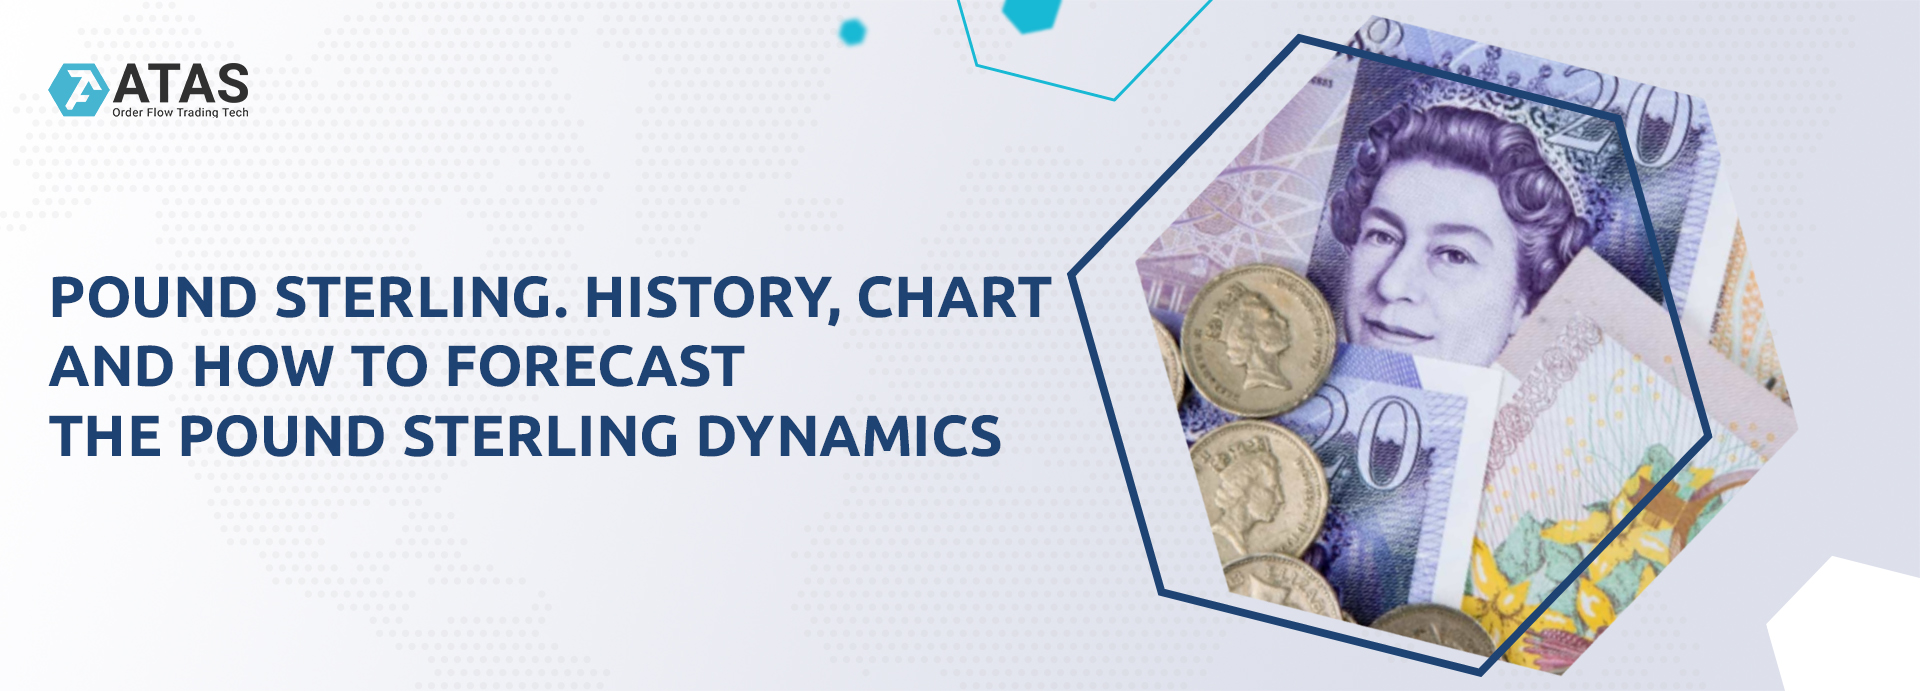 Pound sterling. History, chart and how to forecast the pound sterling dynamics